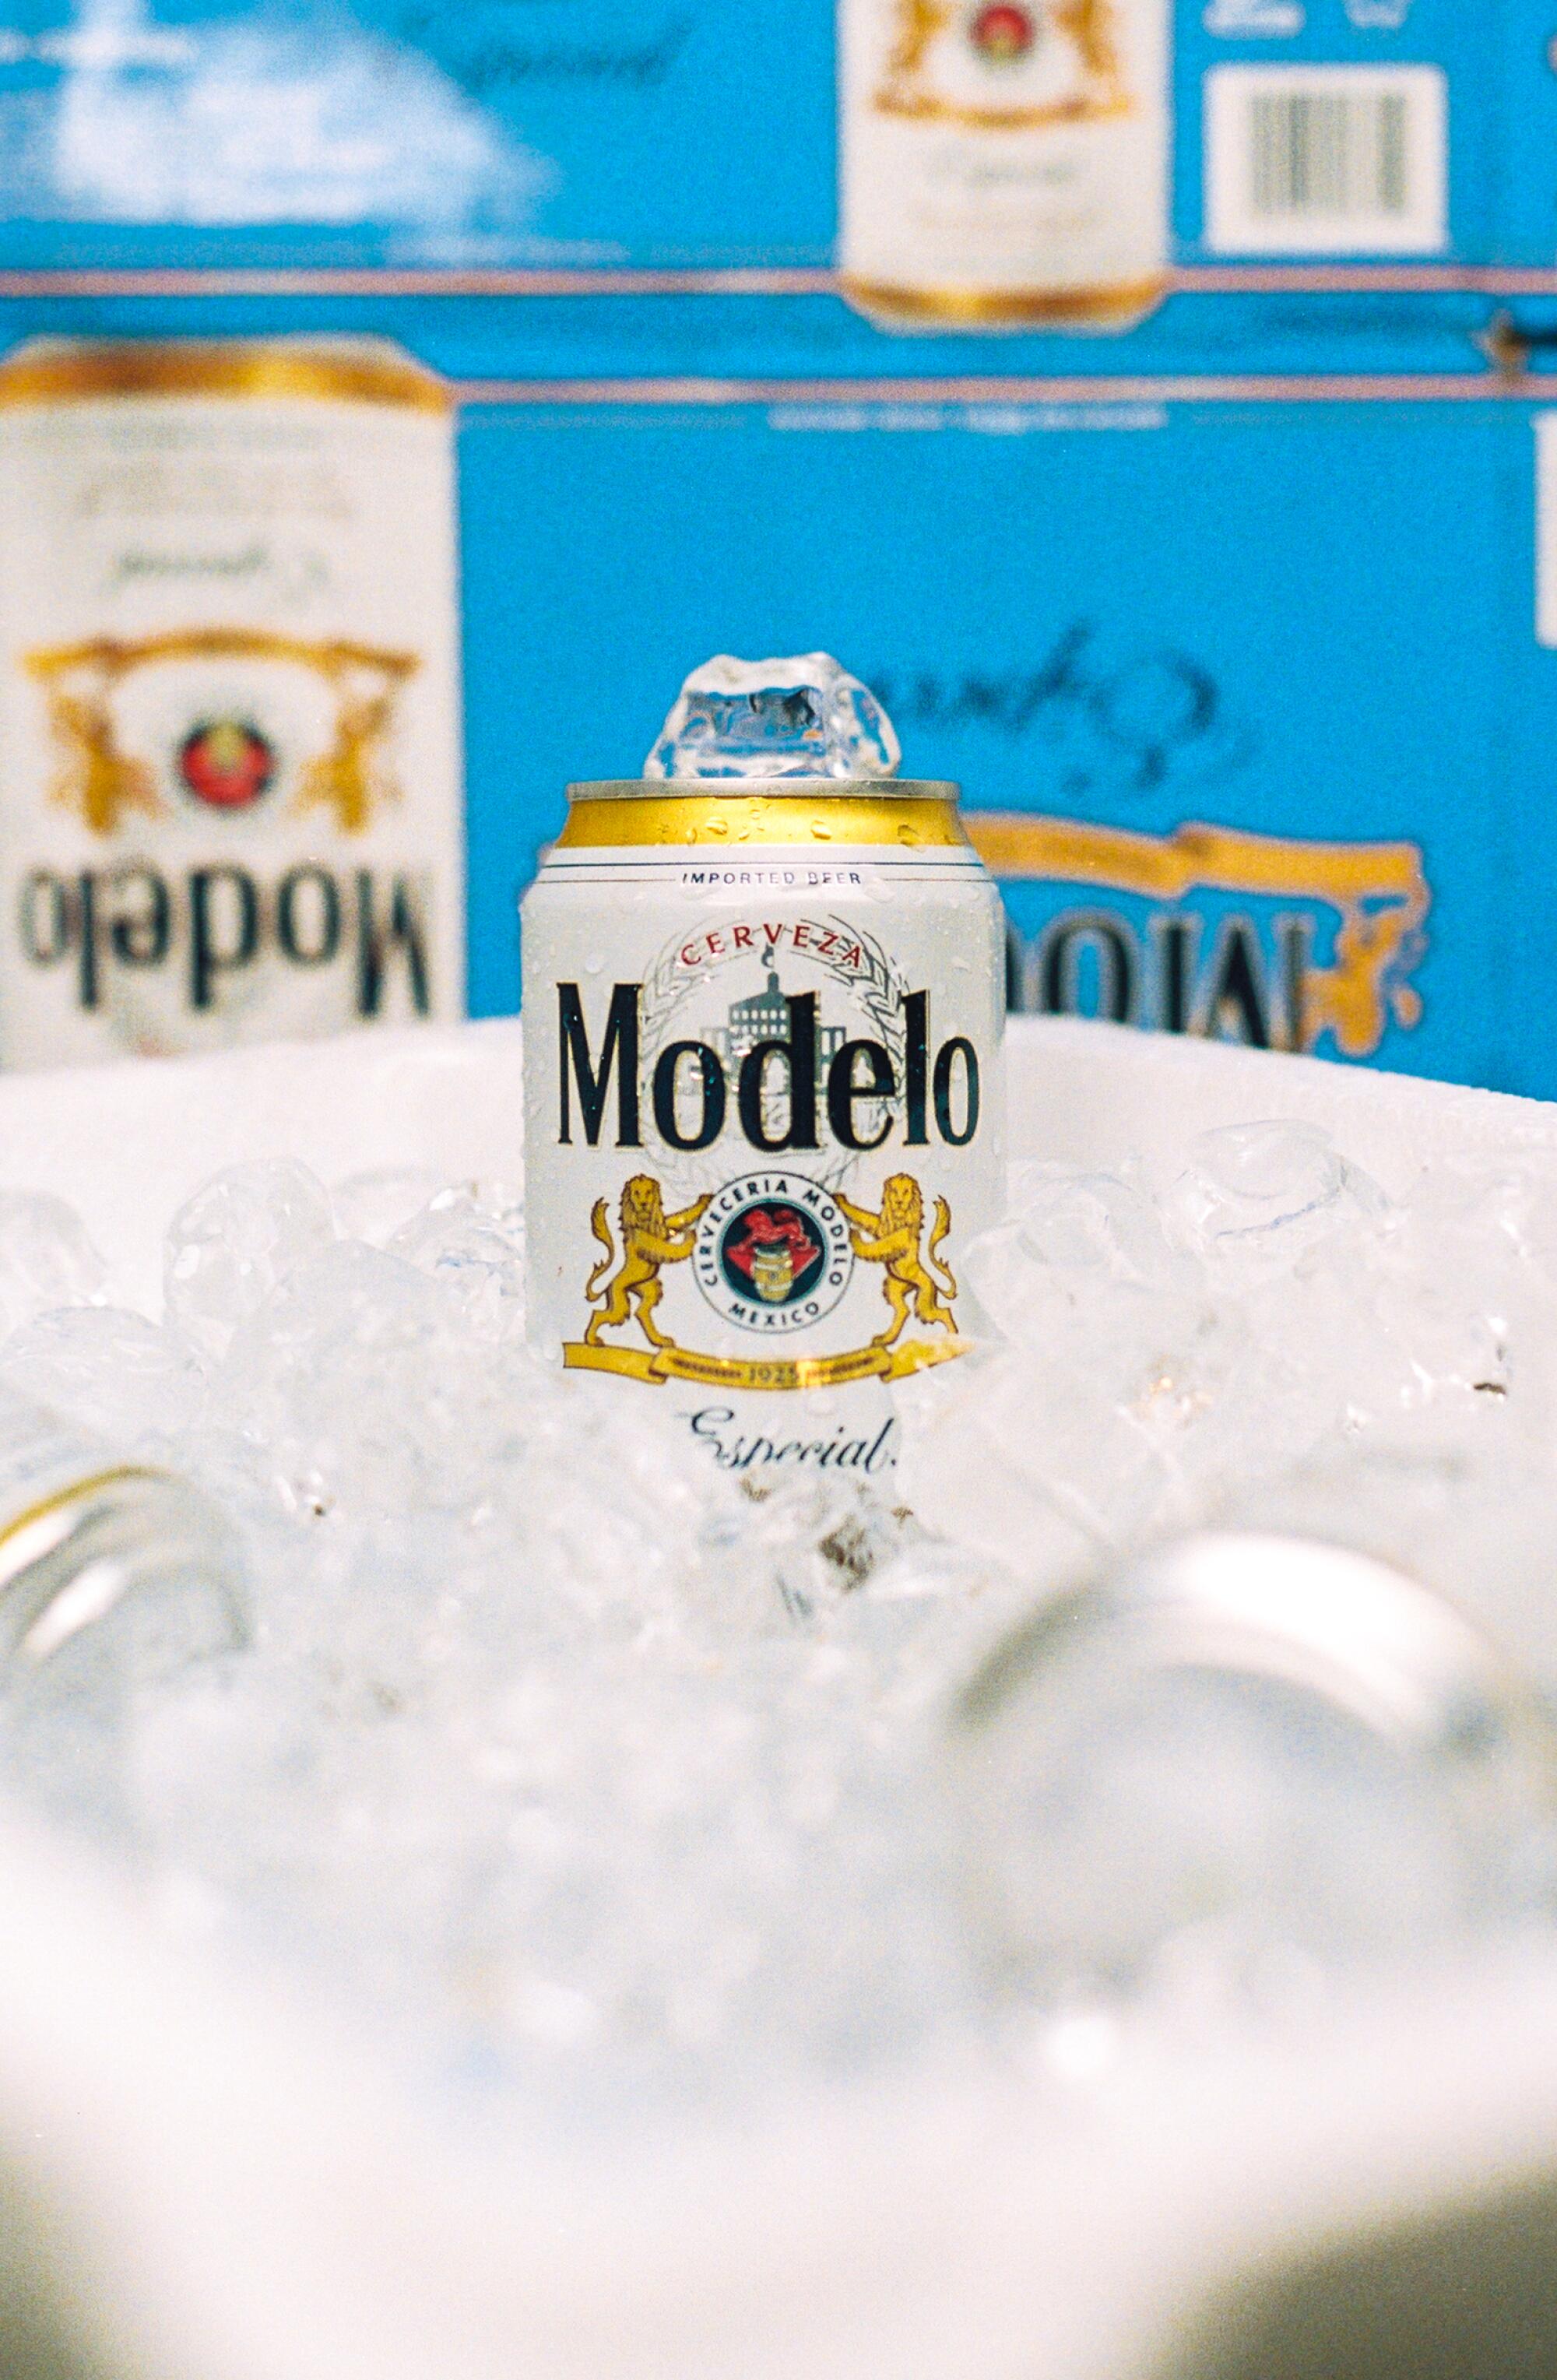 During the summer beer sells well, compared to hard alcohol in winter. And no beer is more popular than Modelo.